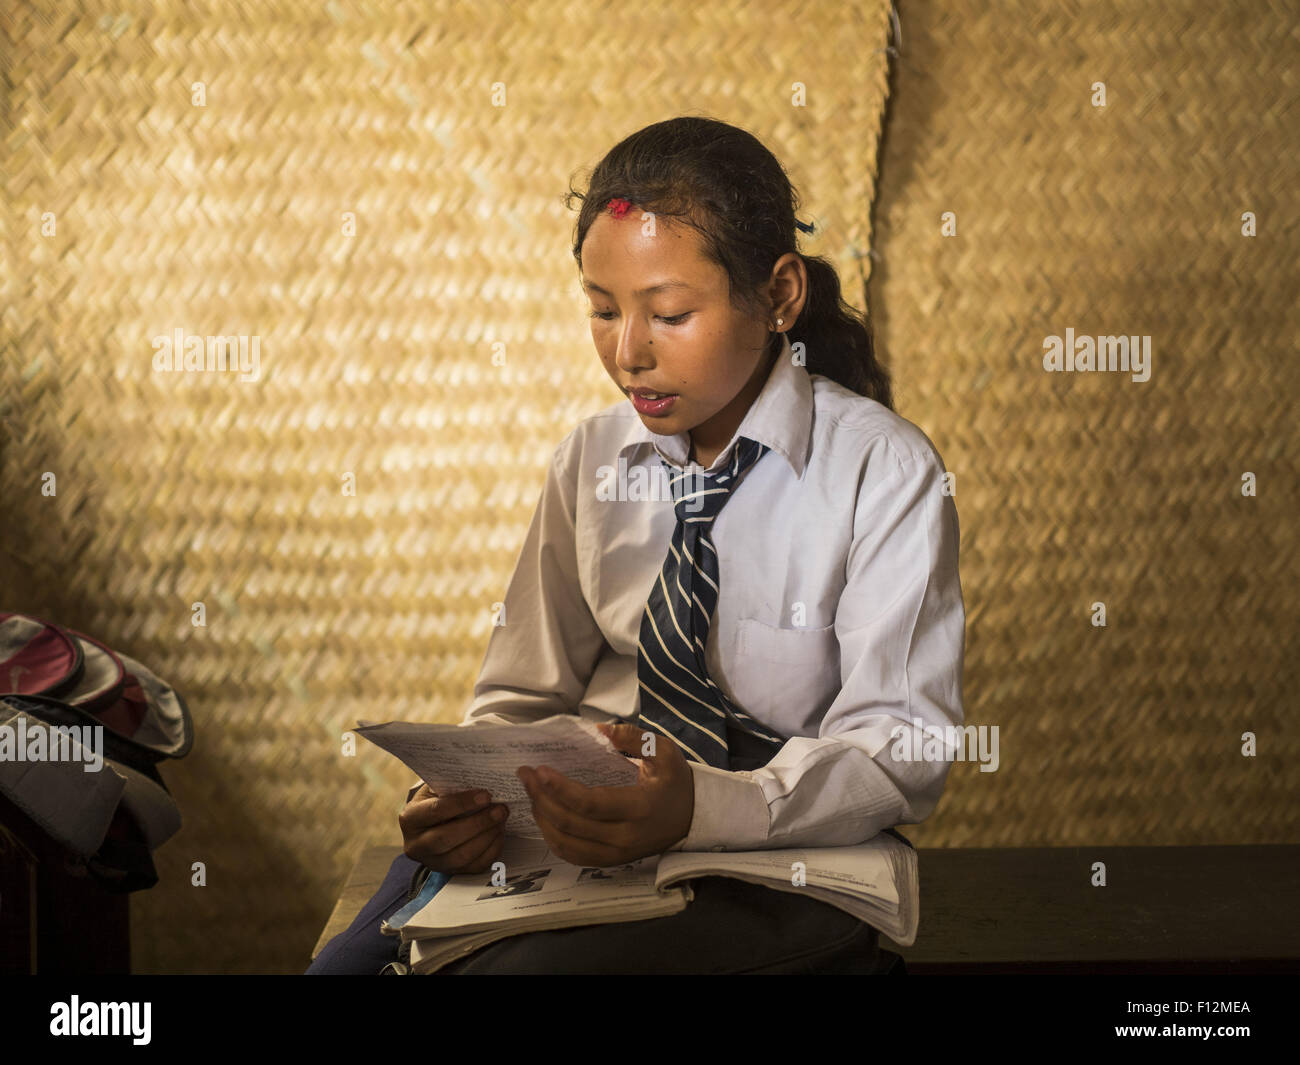 Bhaktapur, Nepal. 2nd Aug, 2015. A student at Sharada Higher Secondary School in Bhaktapur studies in a temporary classroom made out of woven mats before an exam. About half of the school was destroyed in the earthquake that struck in April 2015. The school is being rebuilt by the staff in their spare time. (Credit Image: © Jack Kurtz/zReportage.com via ZUMA Press) Stock Photo